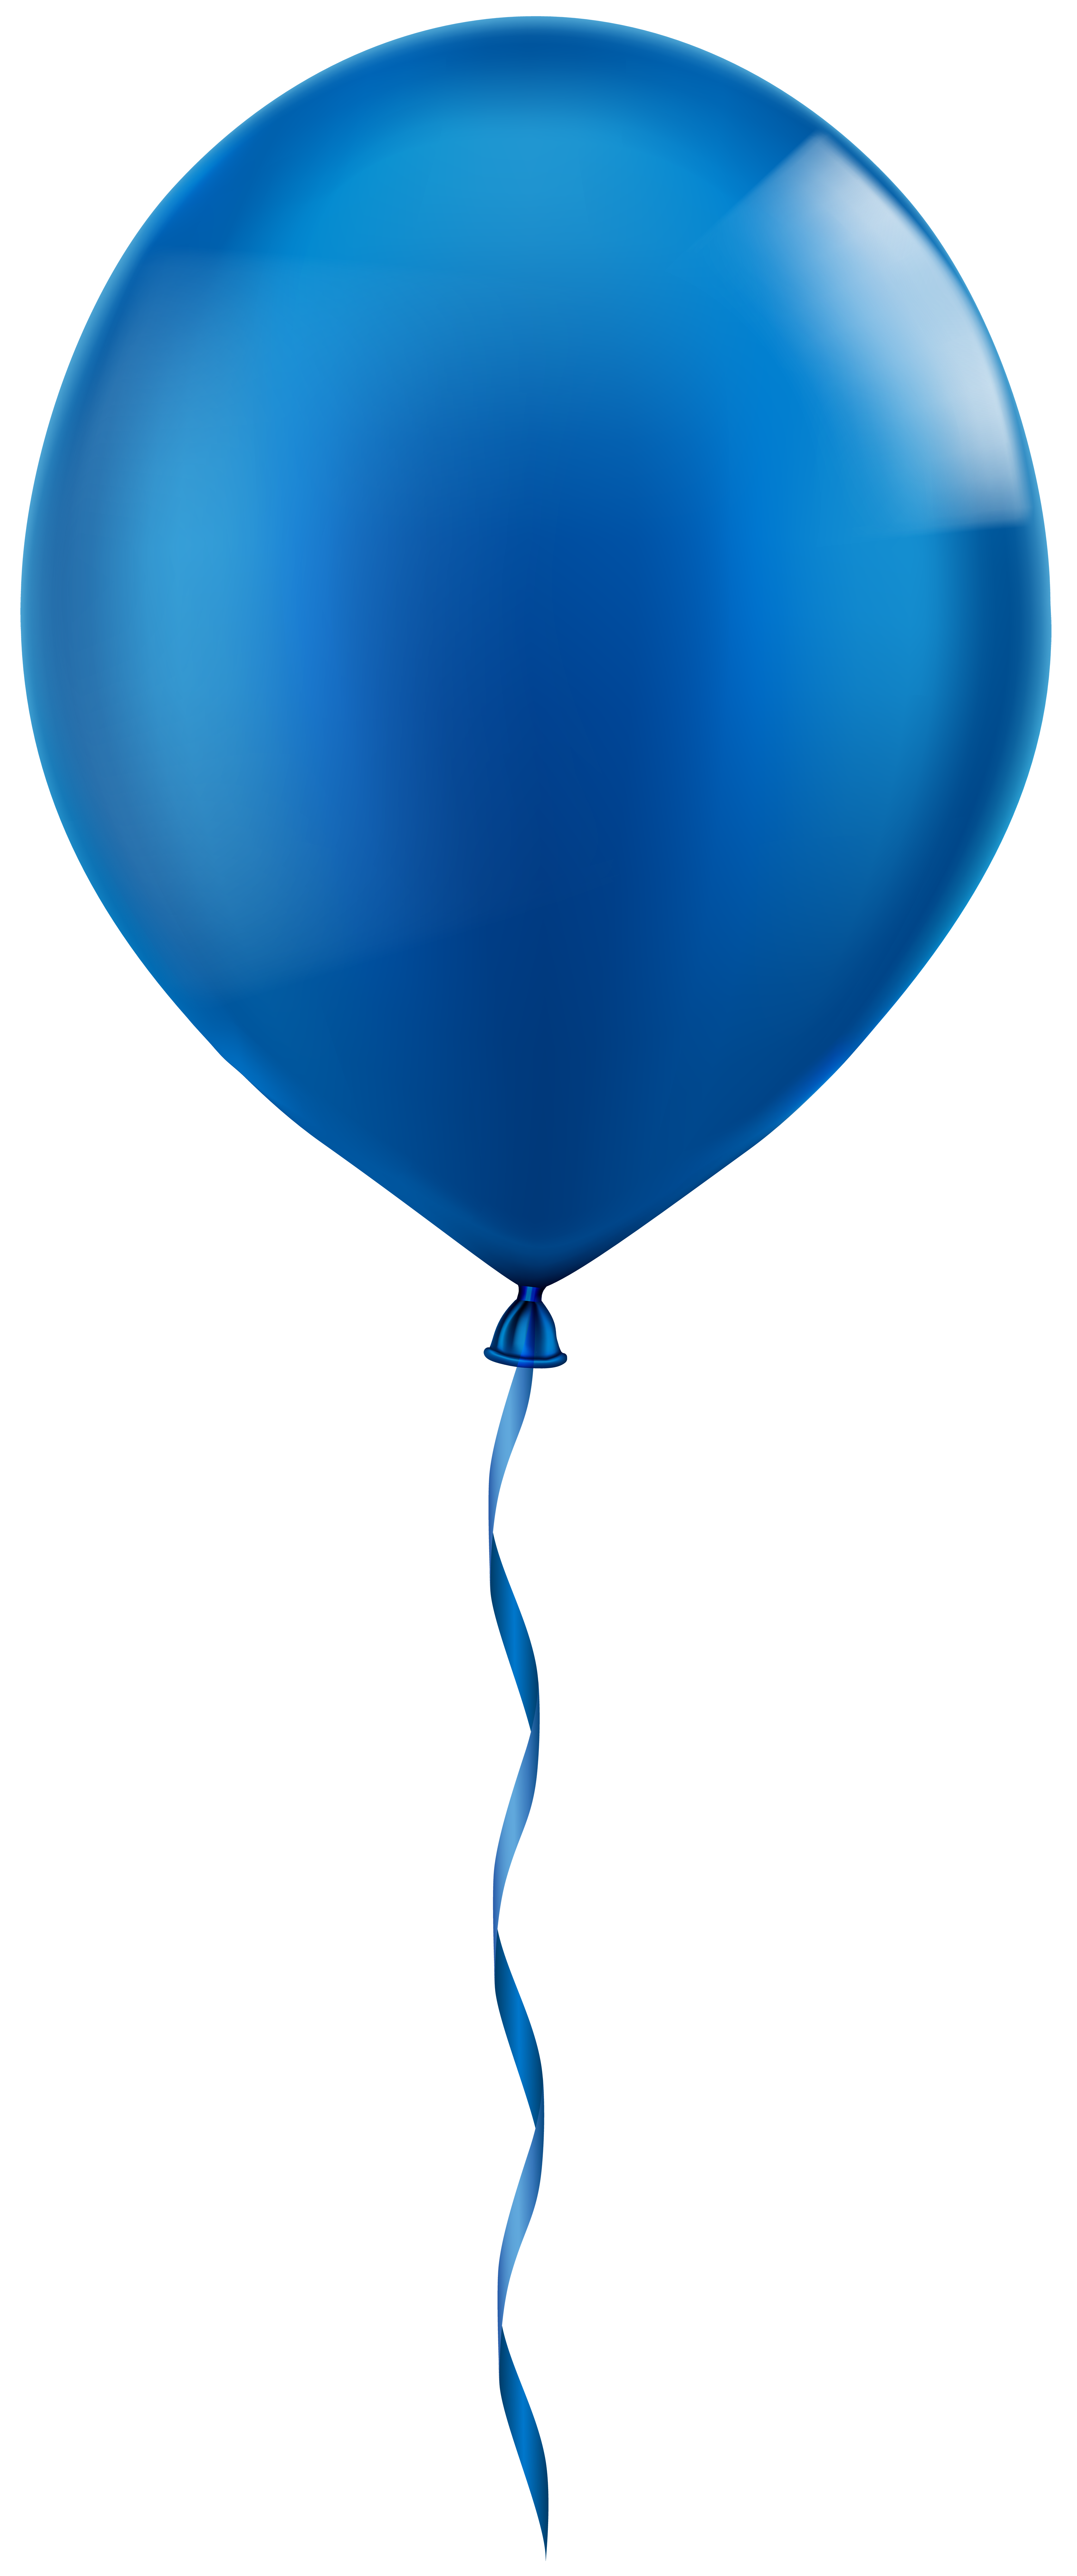 single blue balloon png clip art image gallery yopriceville high quality images and transparent png free clipart gallery yopriceville